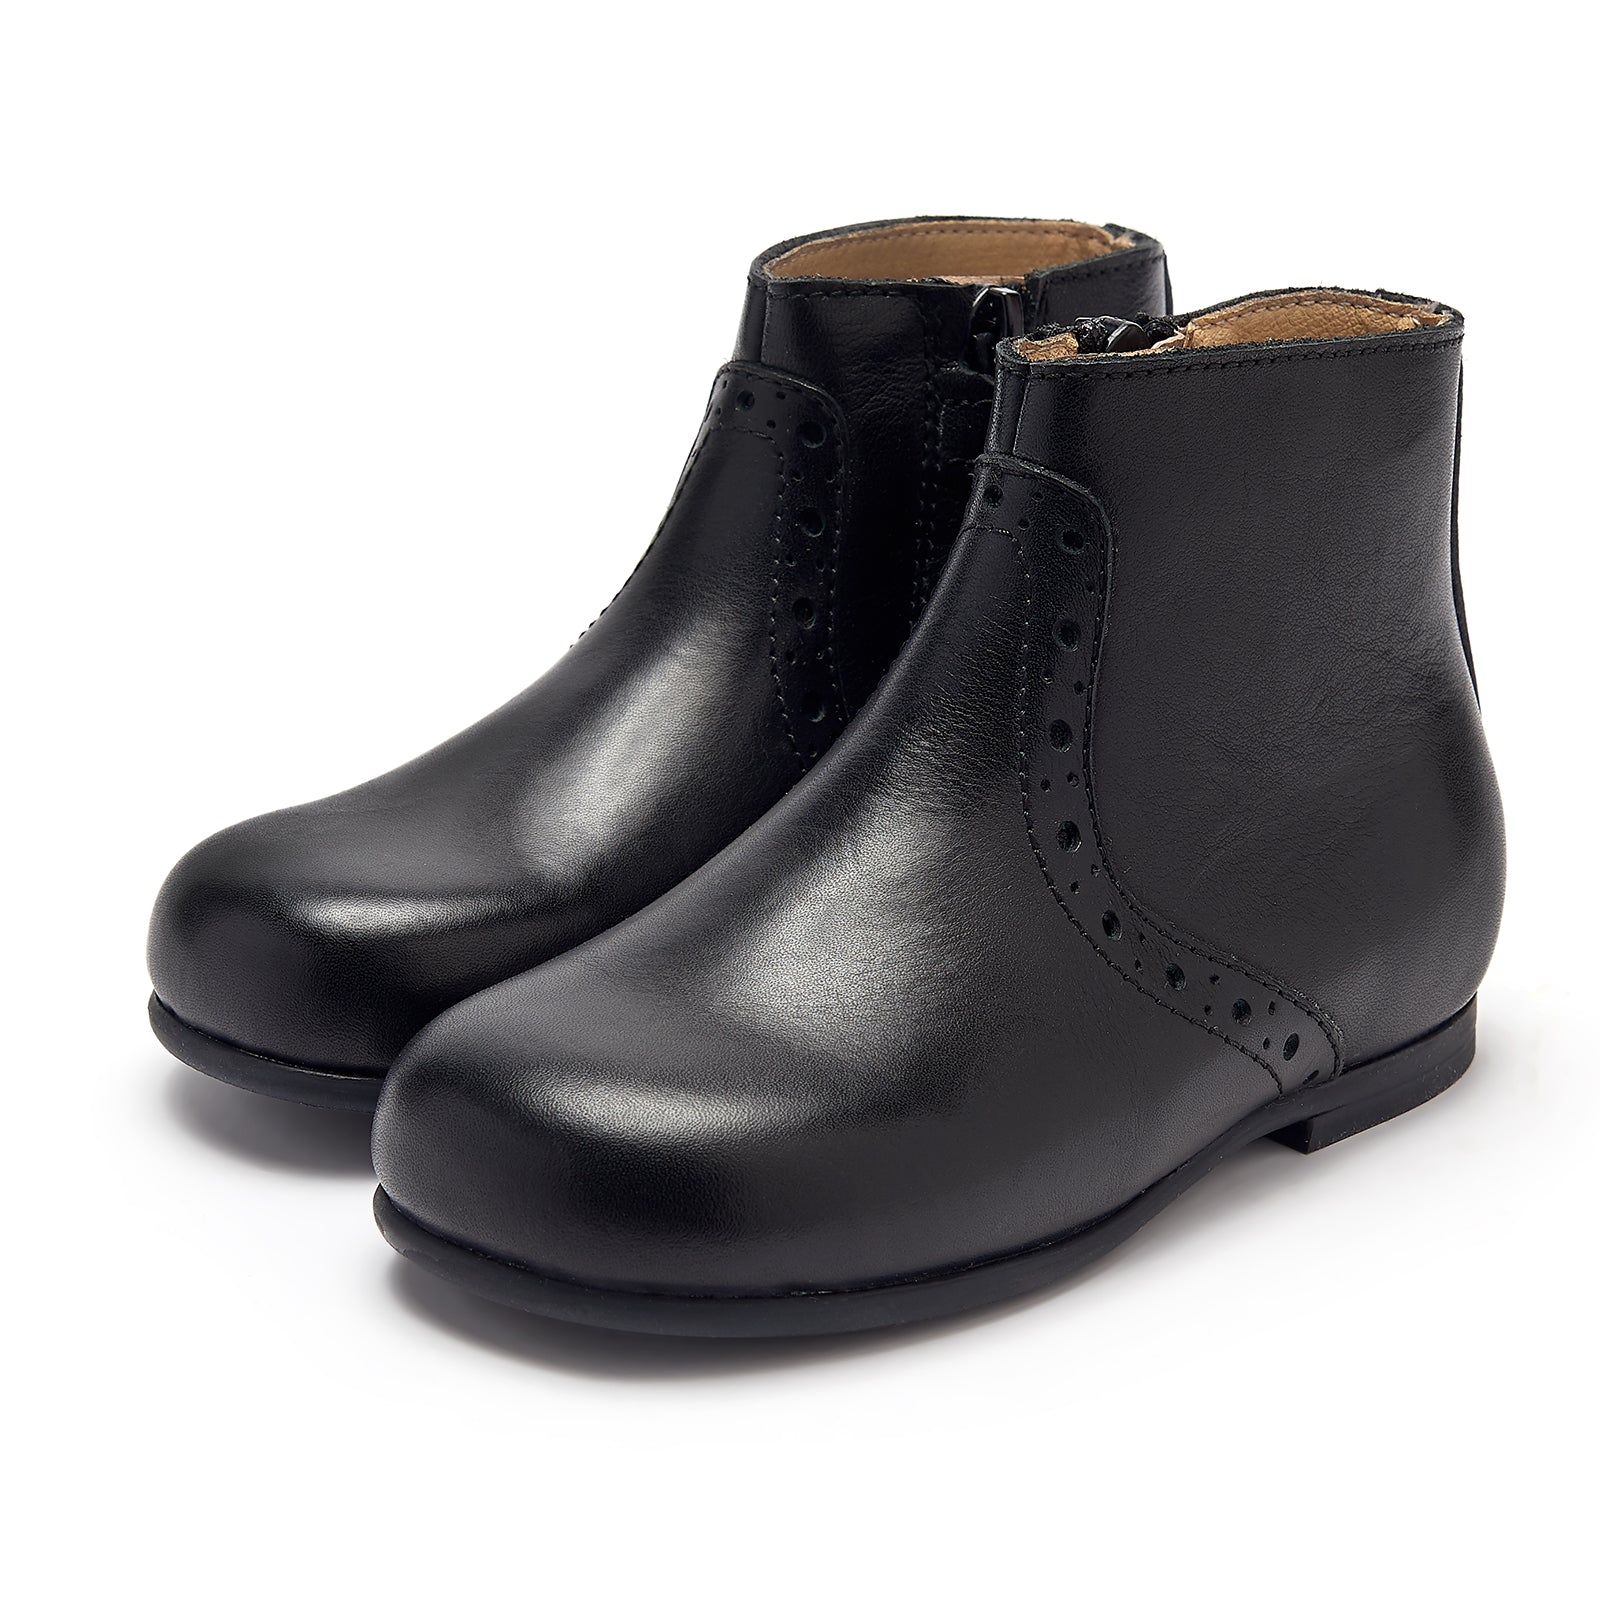 Young Soles Roxy Pixie Leather Boots - Black/Hunter Green